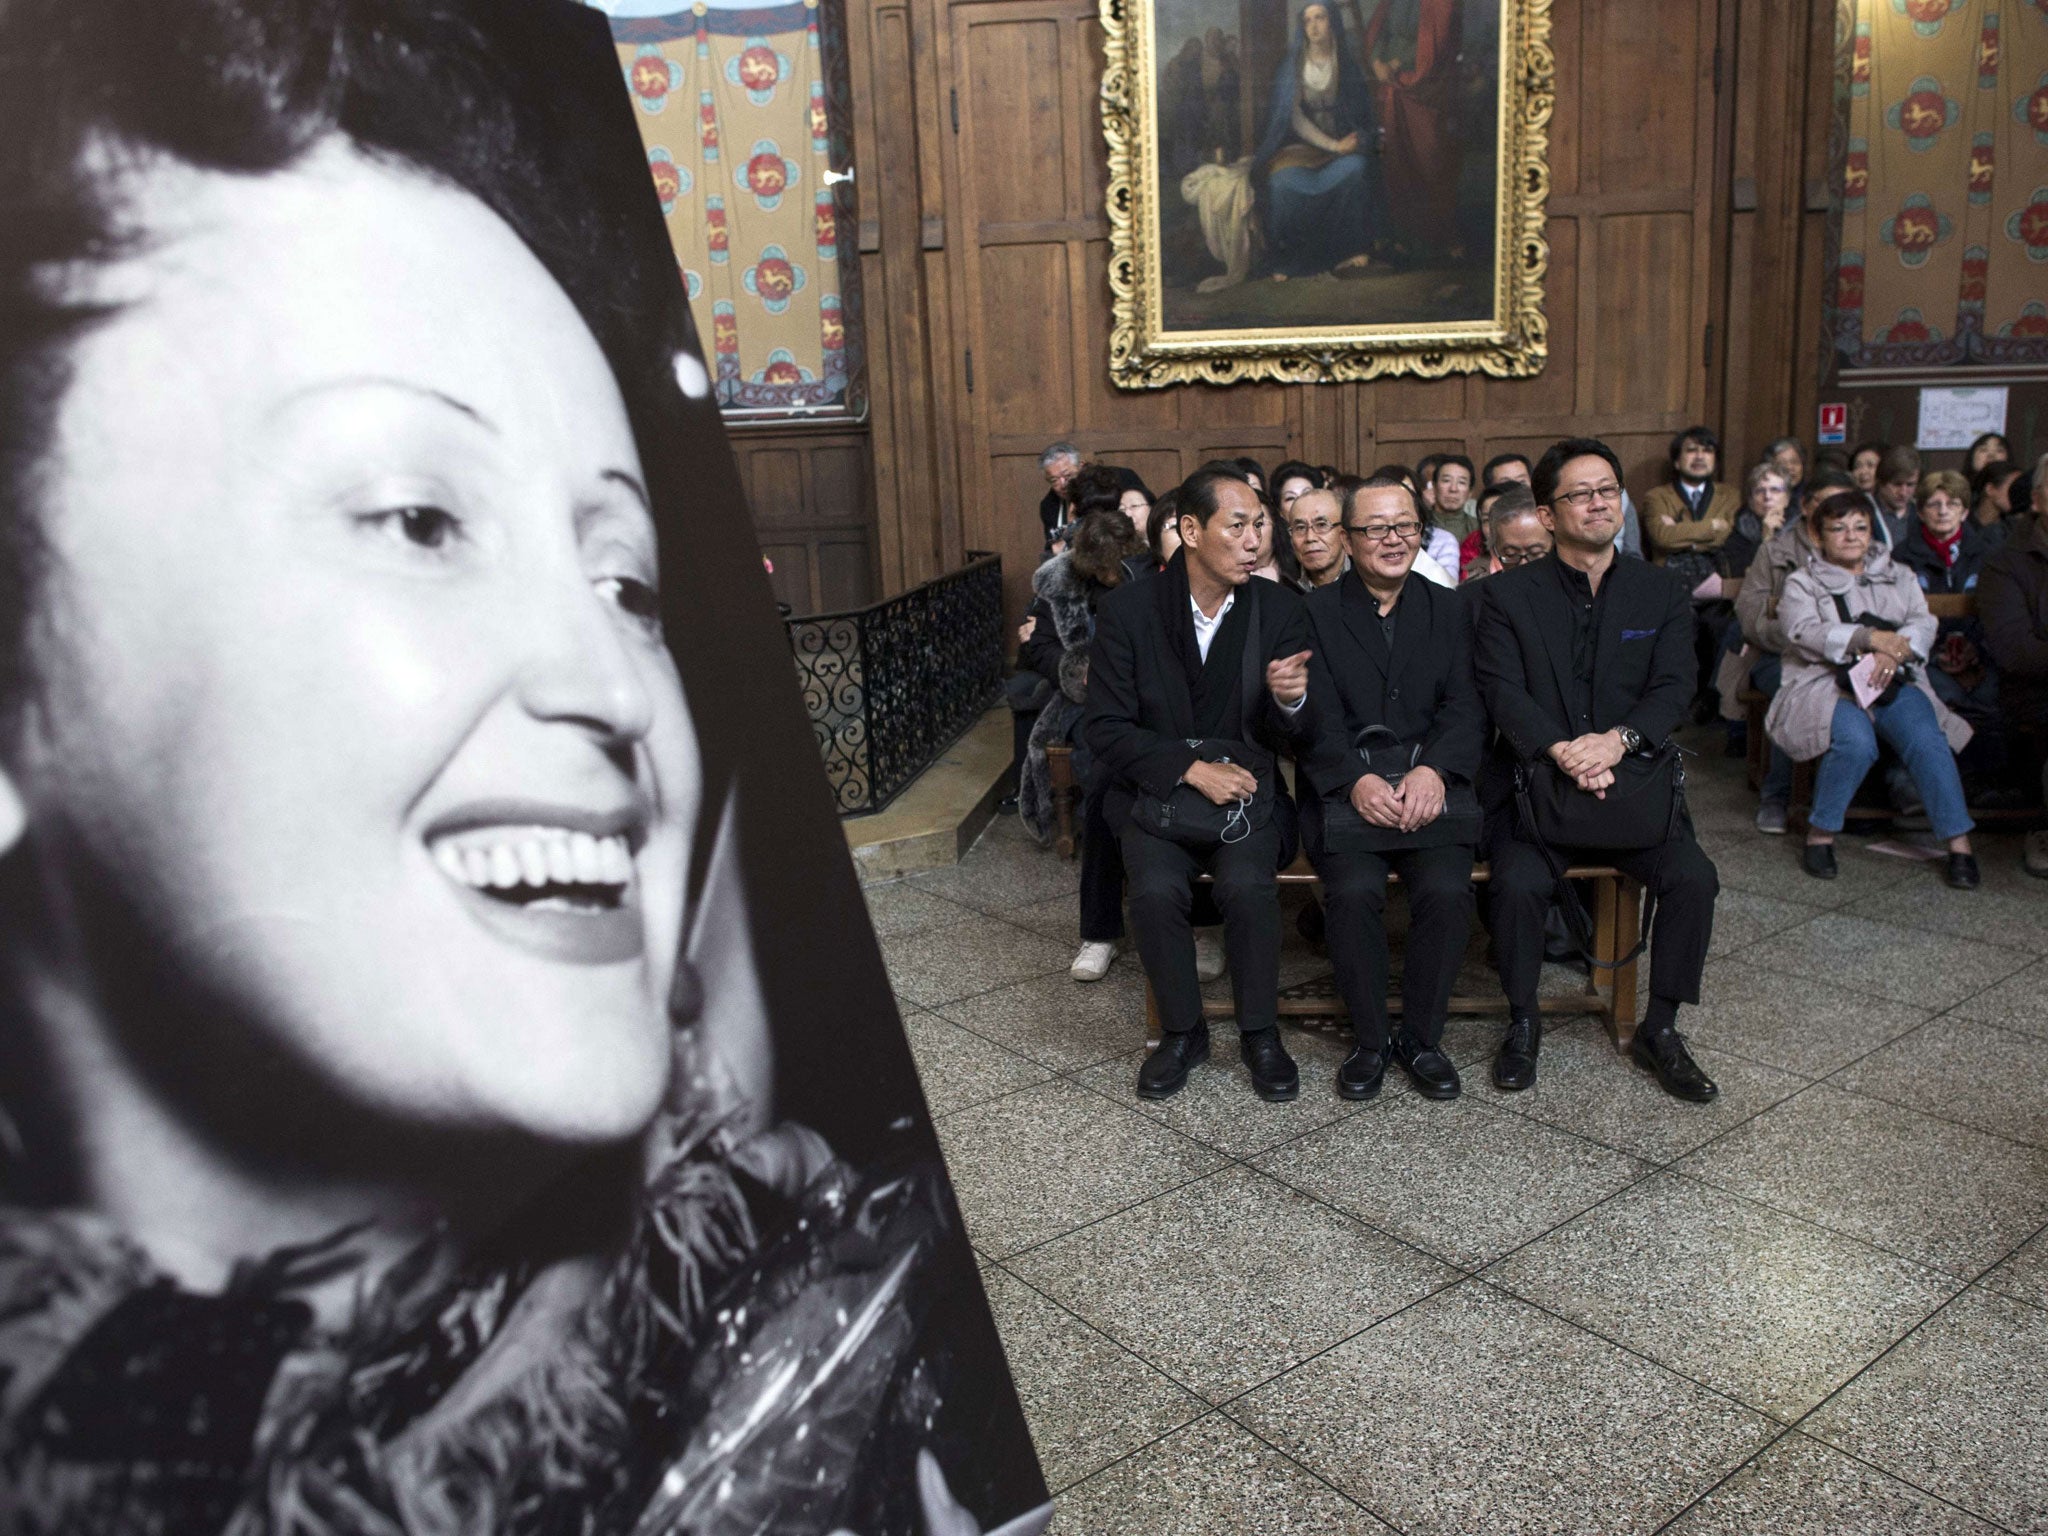 The congregation at the service for Edith Piaf, the French singer, whose song 'La Vie en Rose' has inspired many books and films